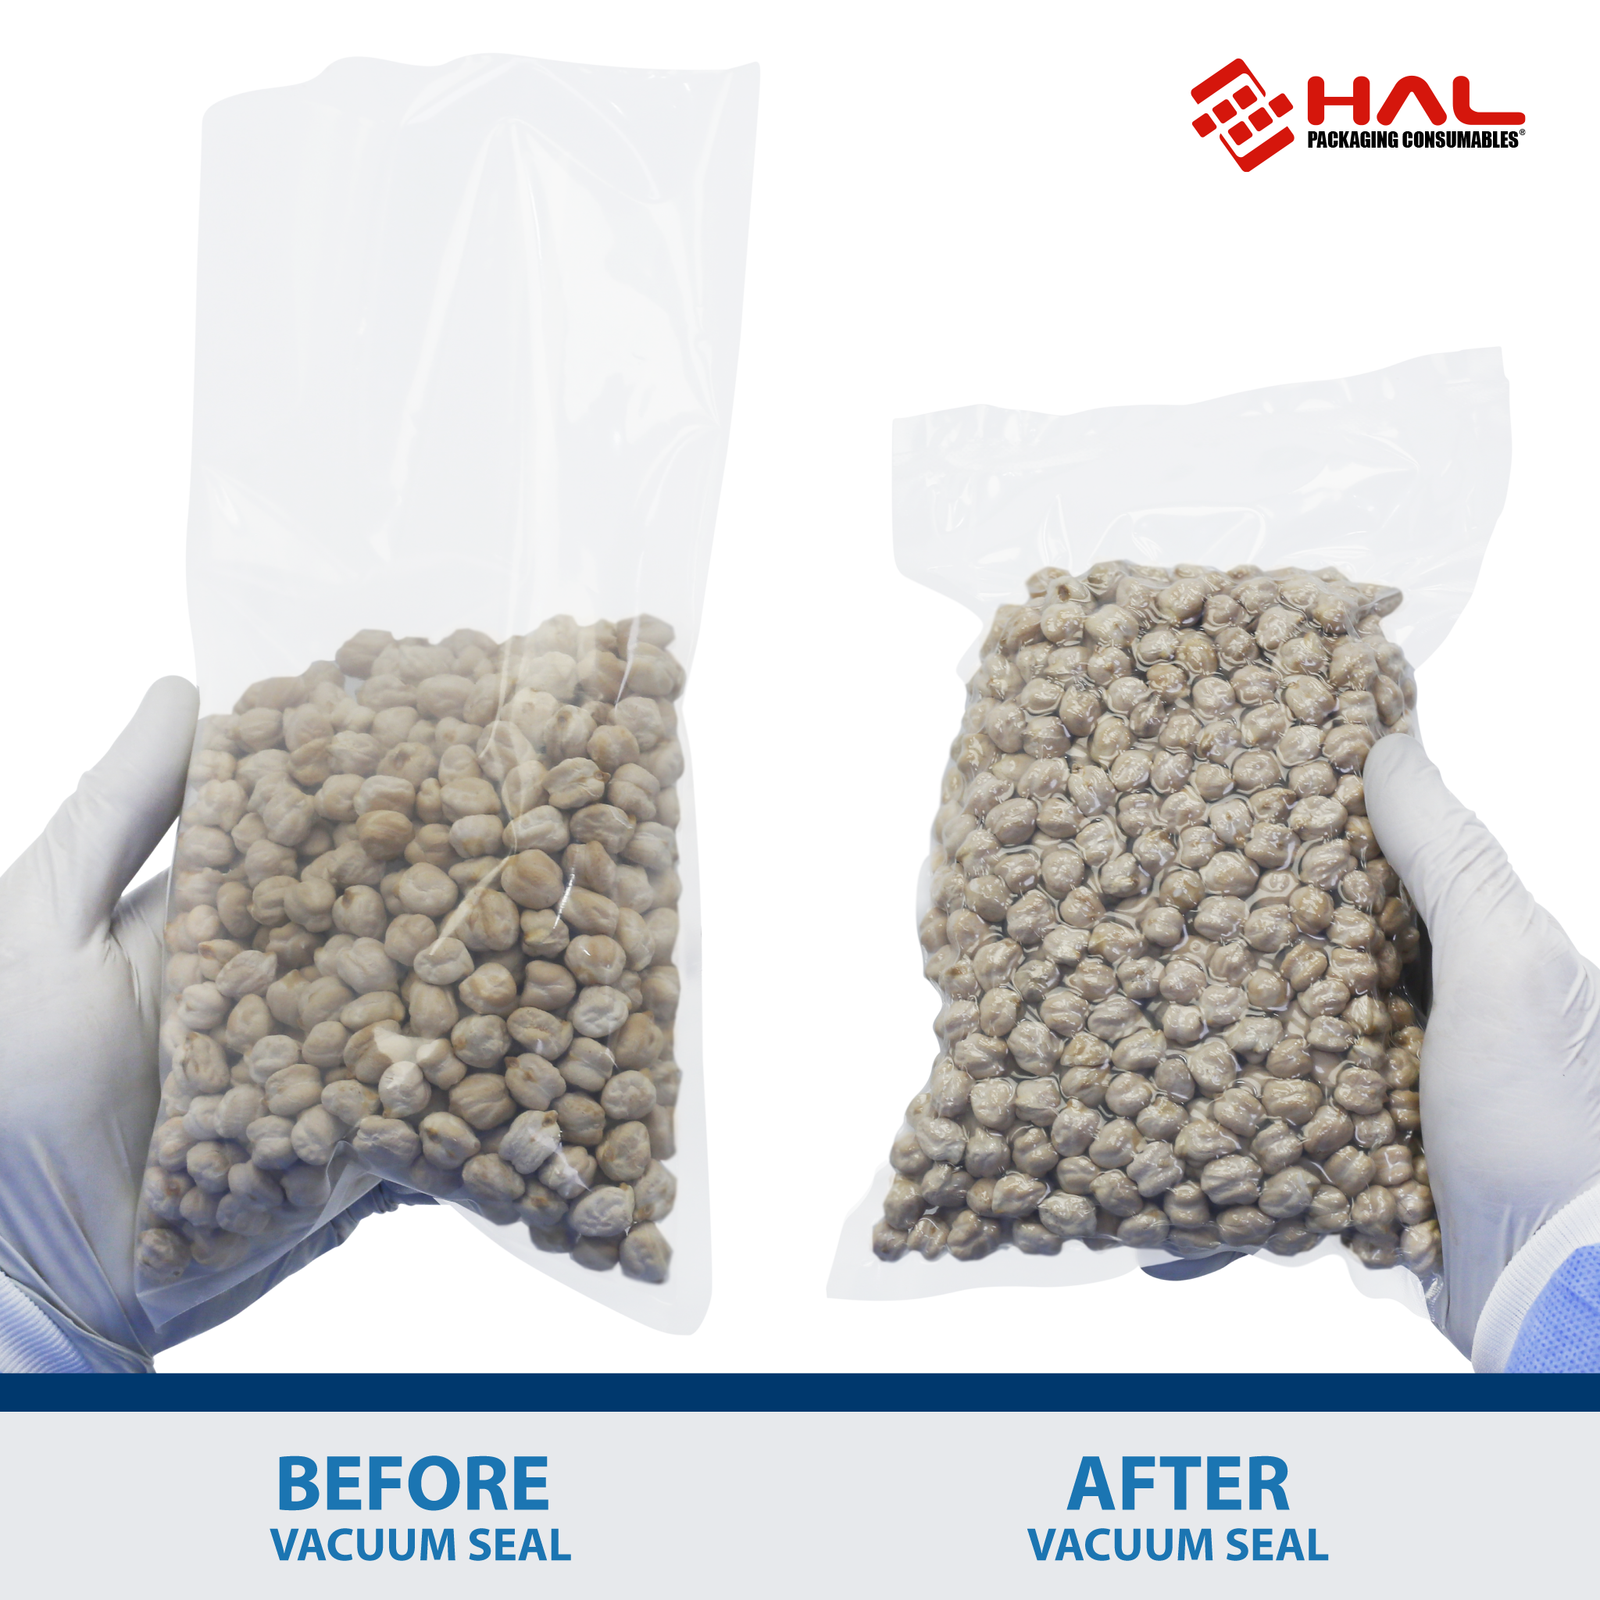 Hands of a person showing the before and after of one HAL bag unsealed with chickpeas inside and then the same bag vacuumed sealed side by side.